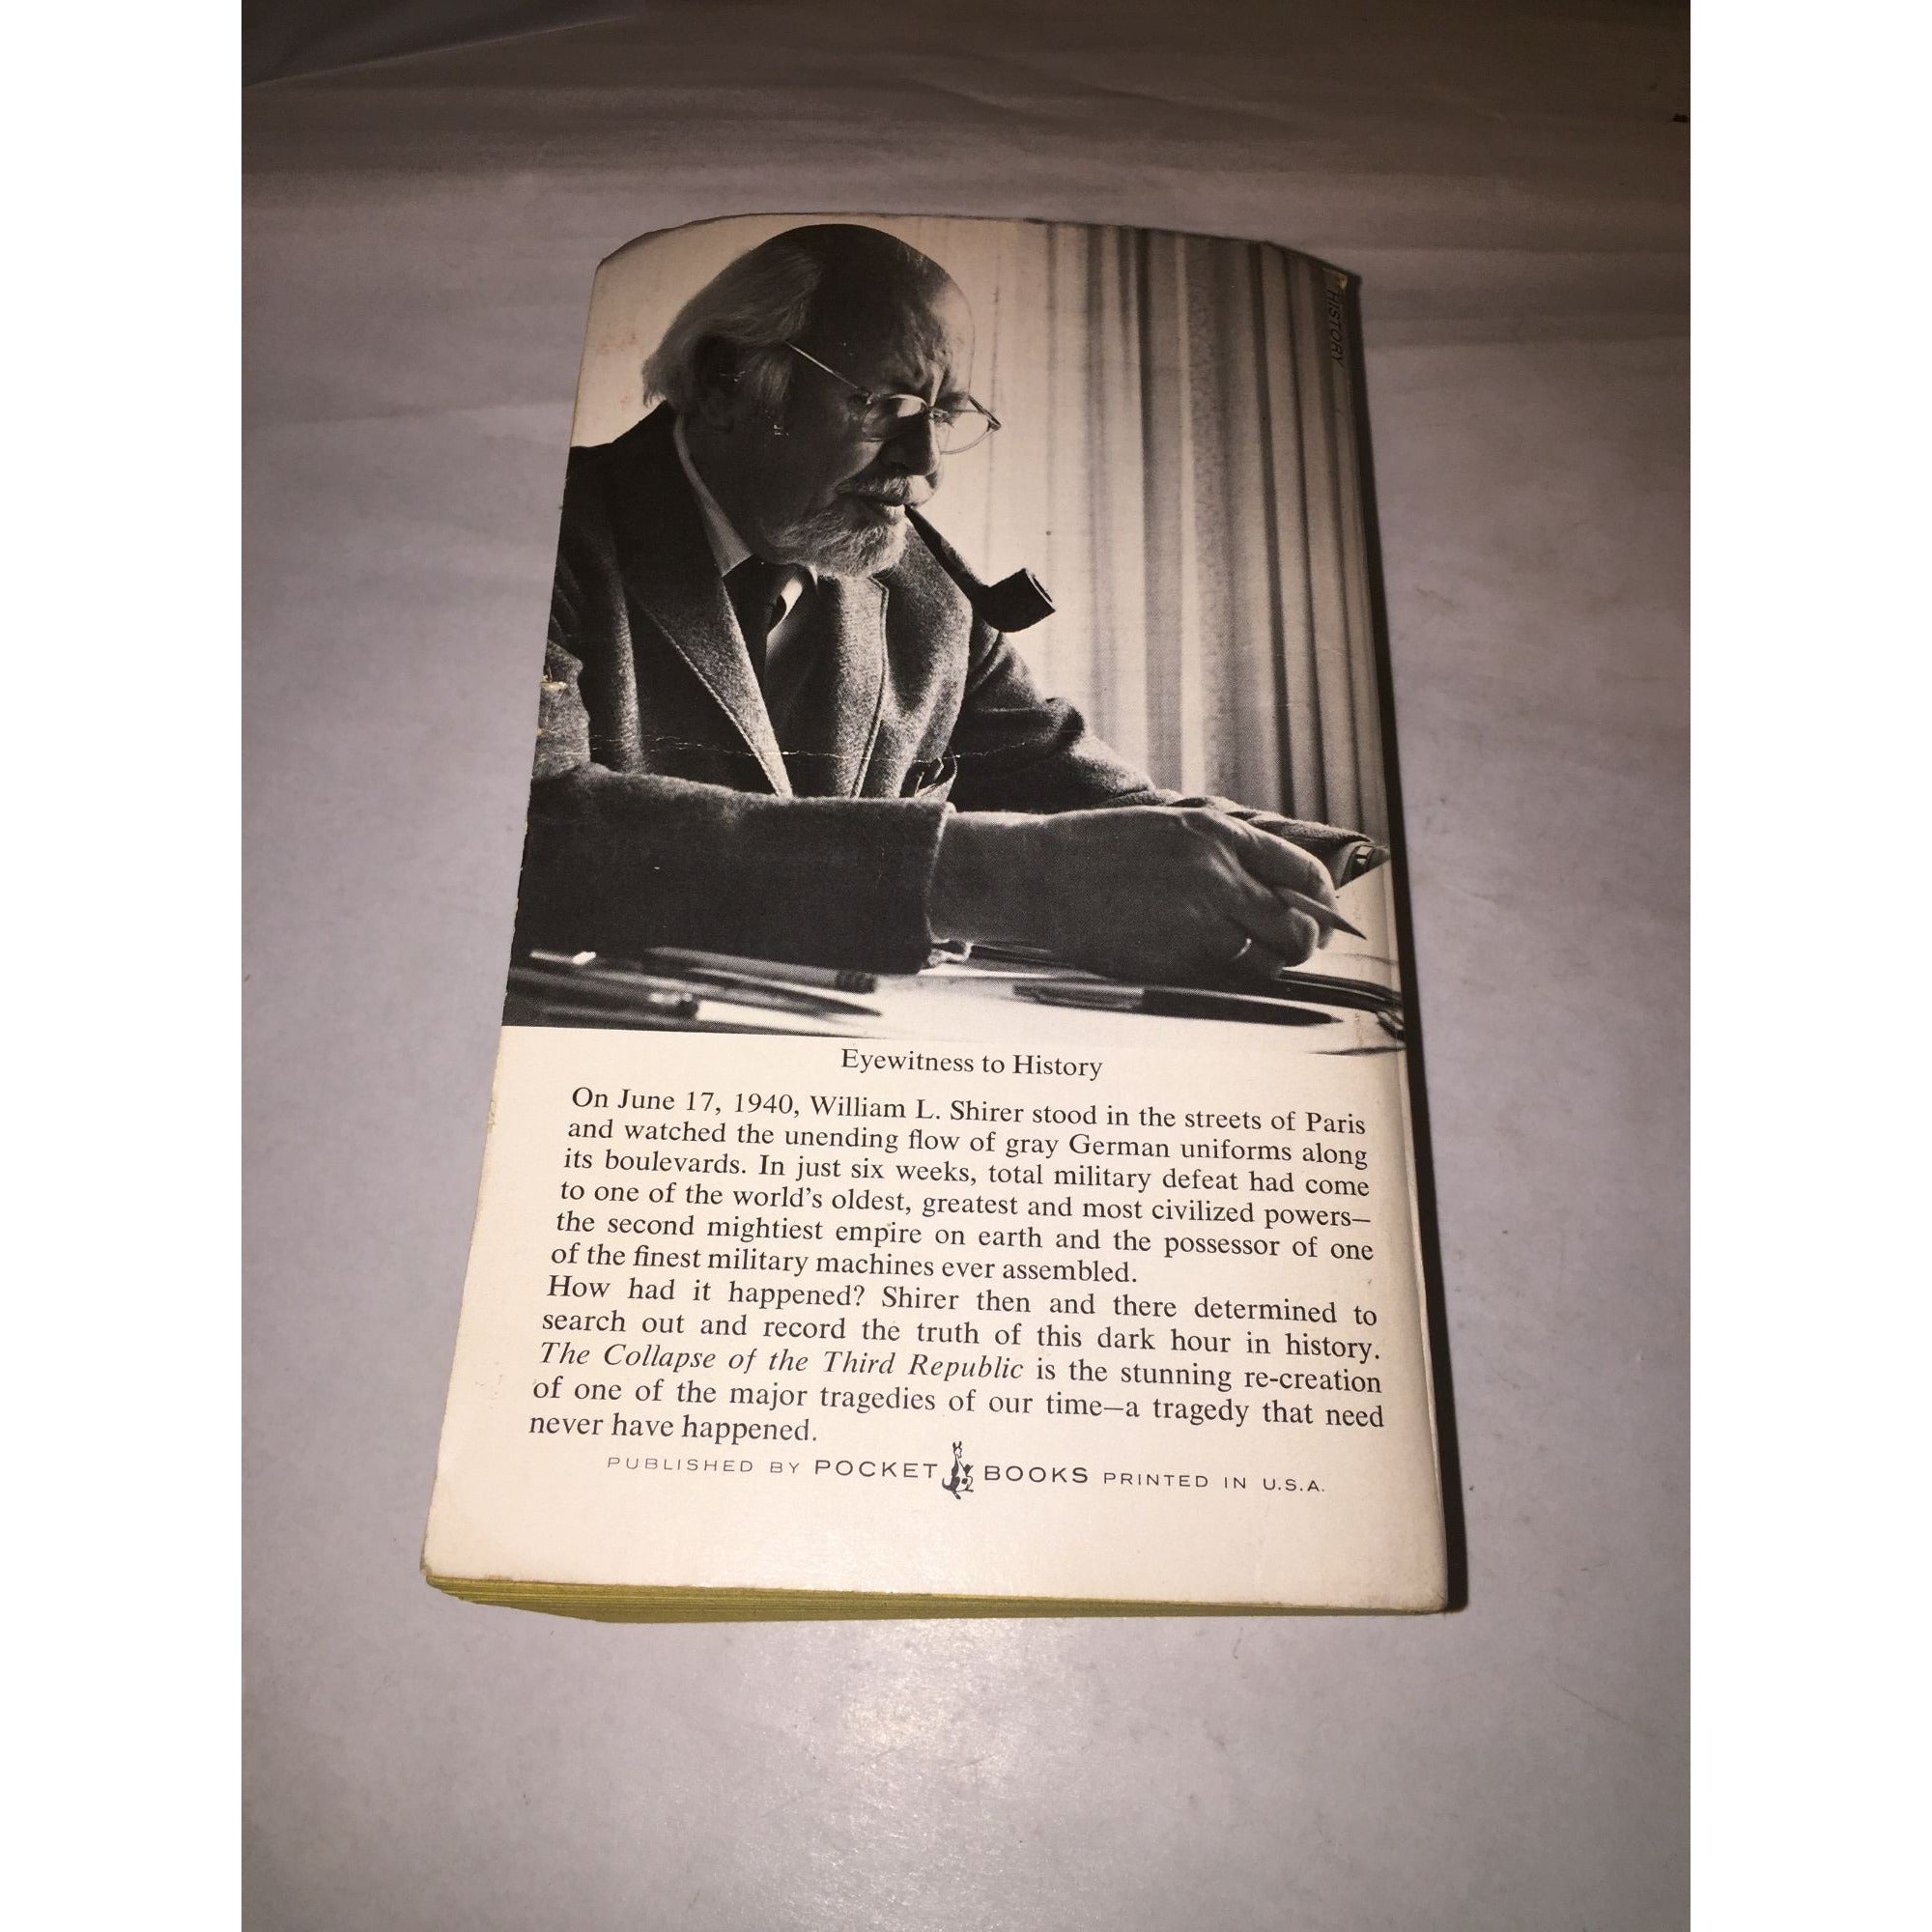 The Collapse of the Third Republic by William L. Shirer book